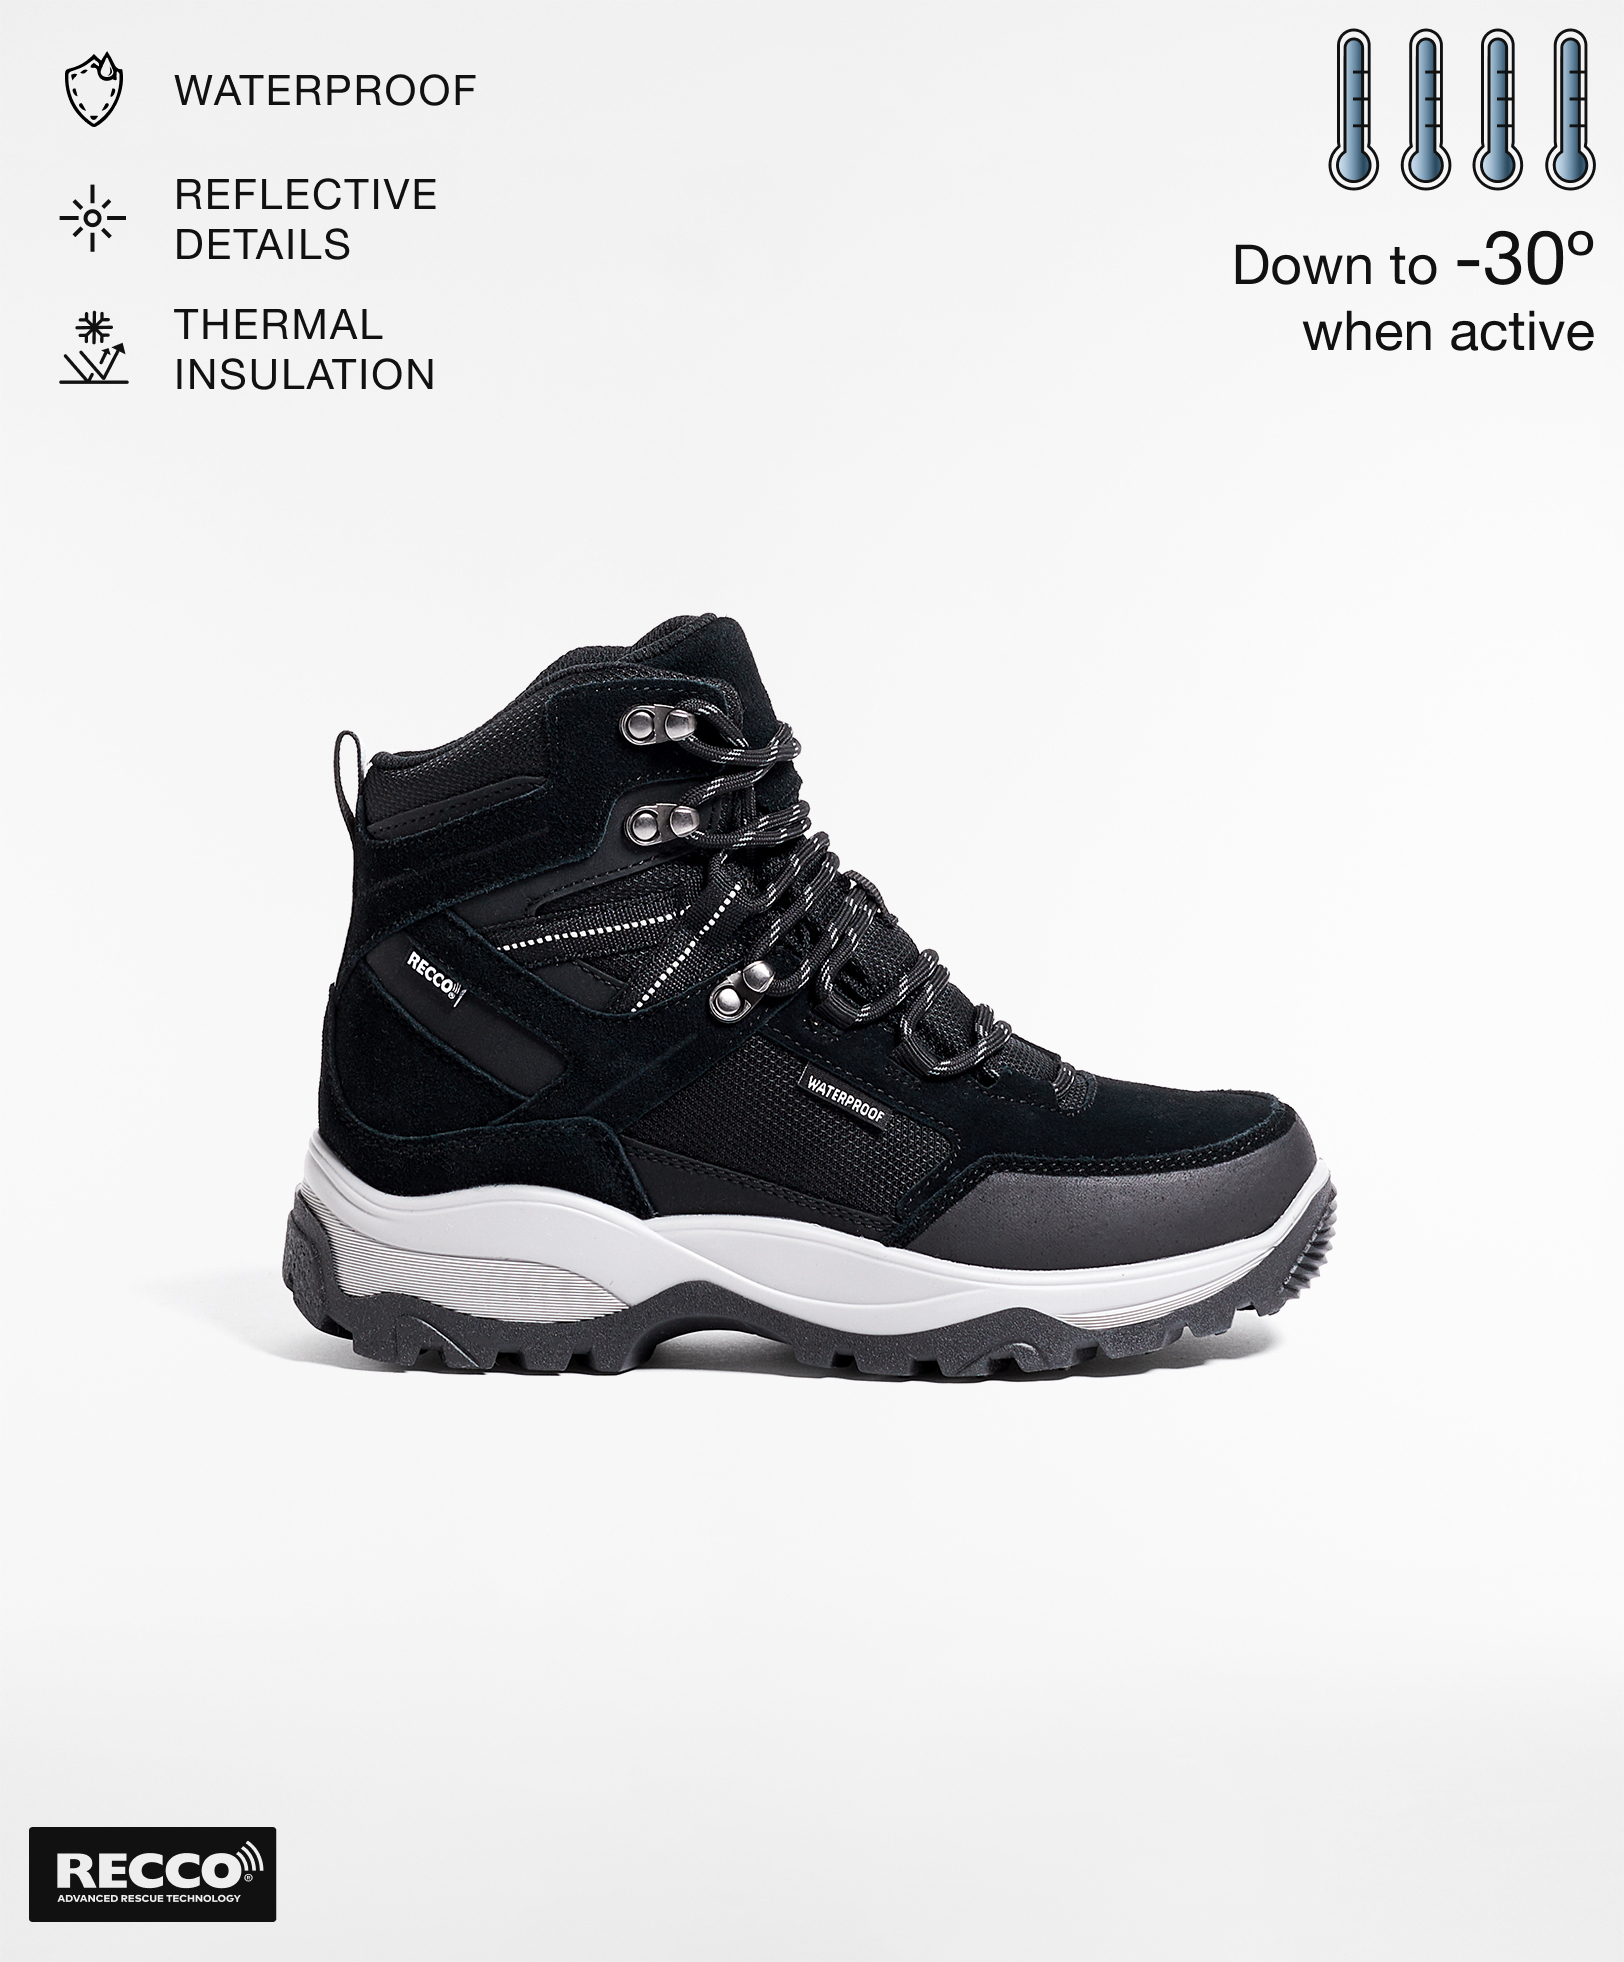 High-top mountain boots